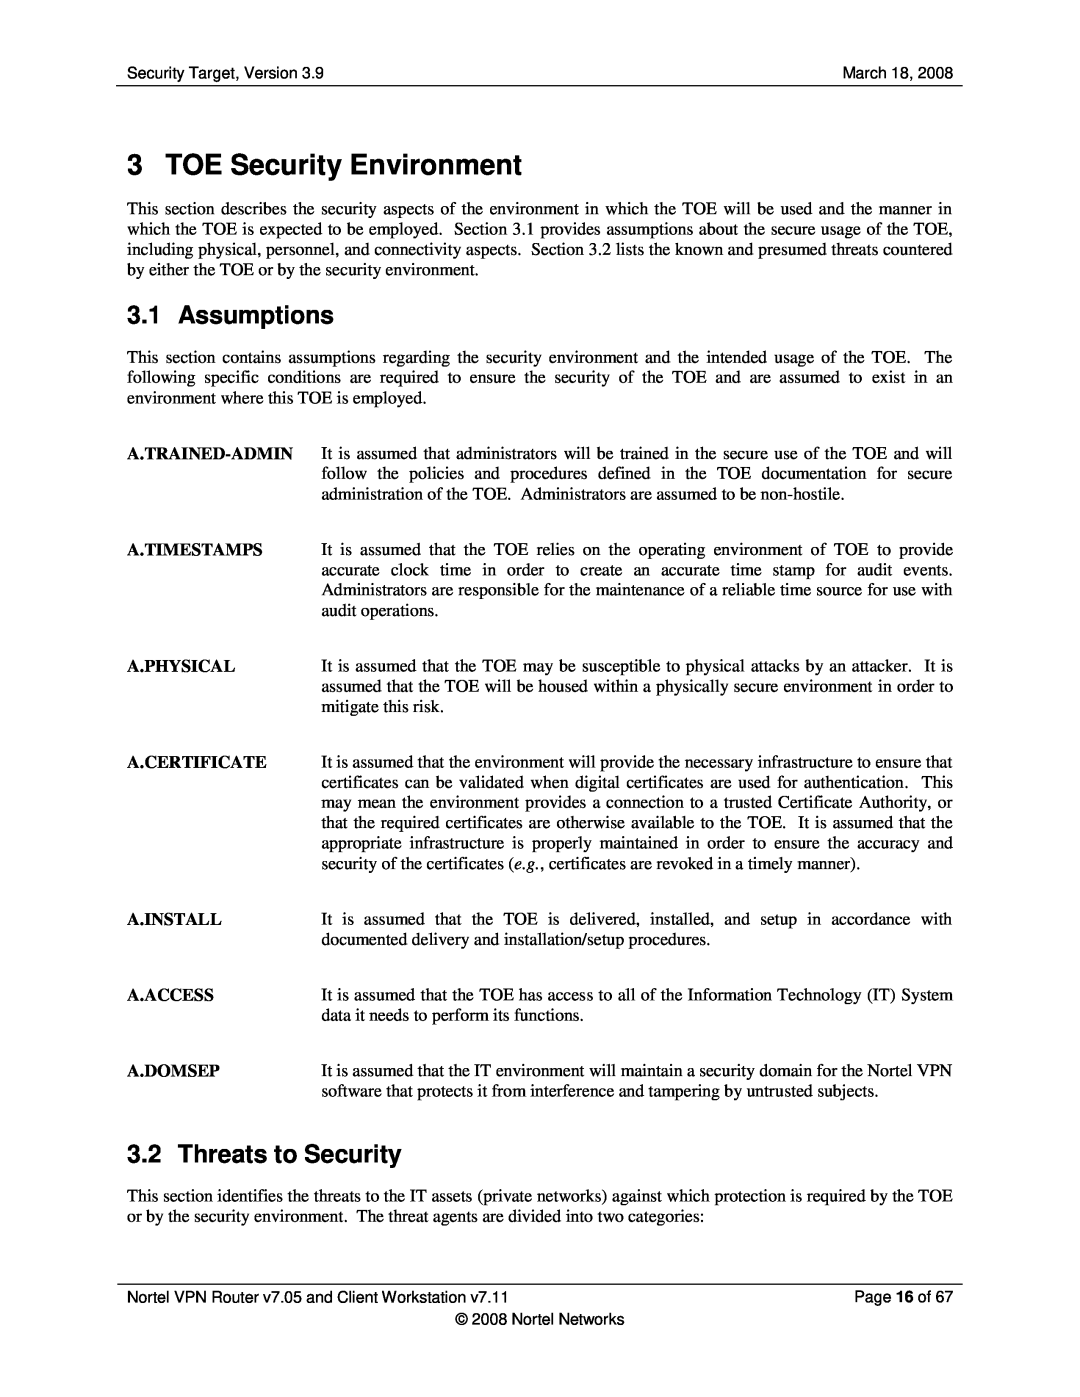 Nortel Networks 7.05, 7.11 manual TOE Security Environment, Assumptions, Threats to Security 